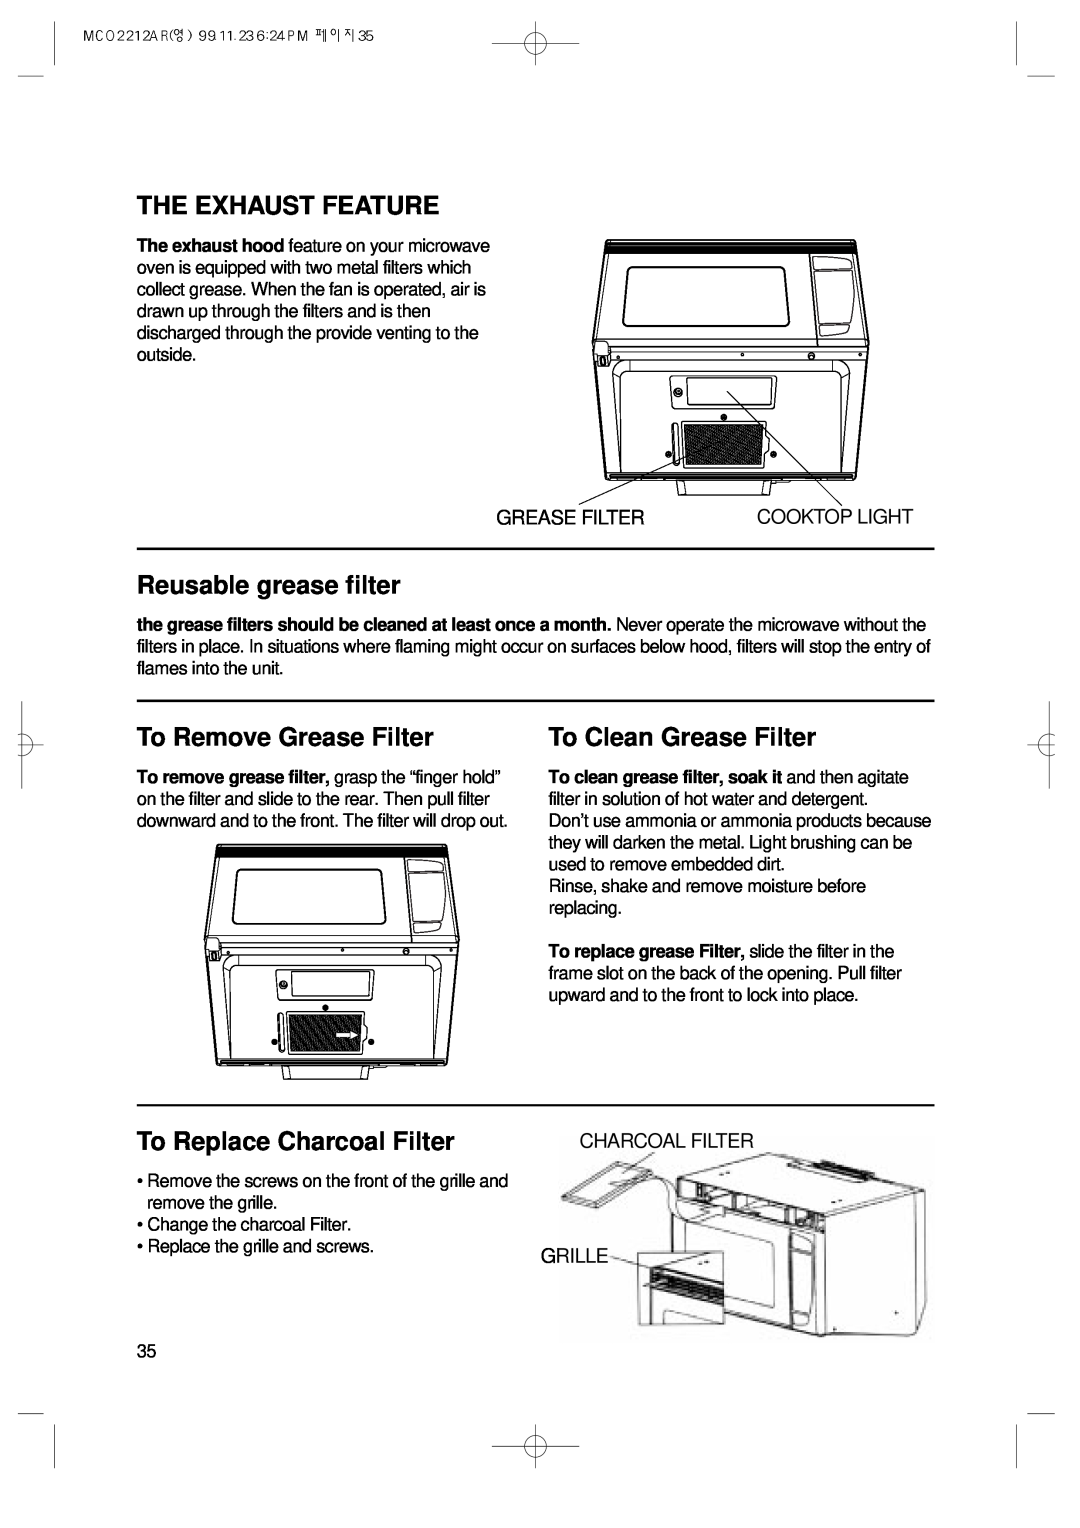 Magic Chef MCO2212AR manual The Exhaust Feature, Reusable grease filter, To Remove Grease Filter, To Clean Grease Filter 